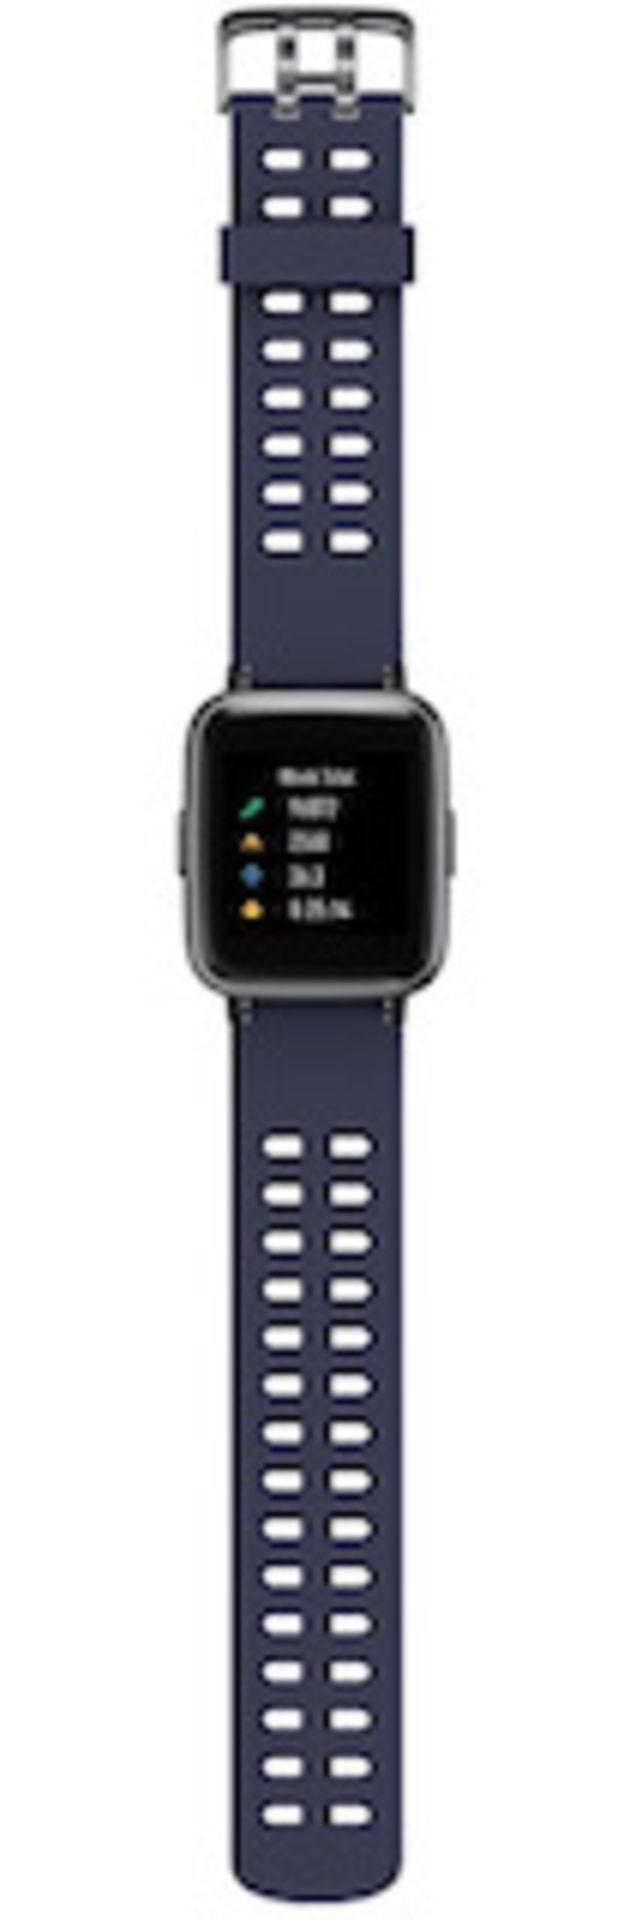 Brand New Unisex Fitness Tracker Watch Id205 Blue/Grey Strap About This Item.1.3-Inch LCD Colour - Image 11 of 33